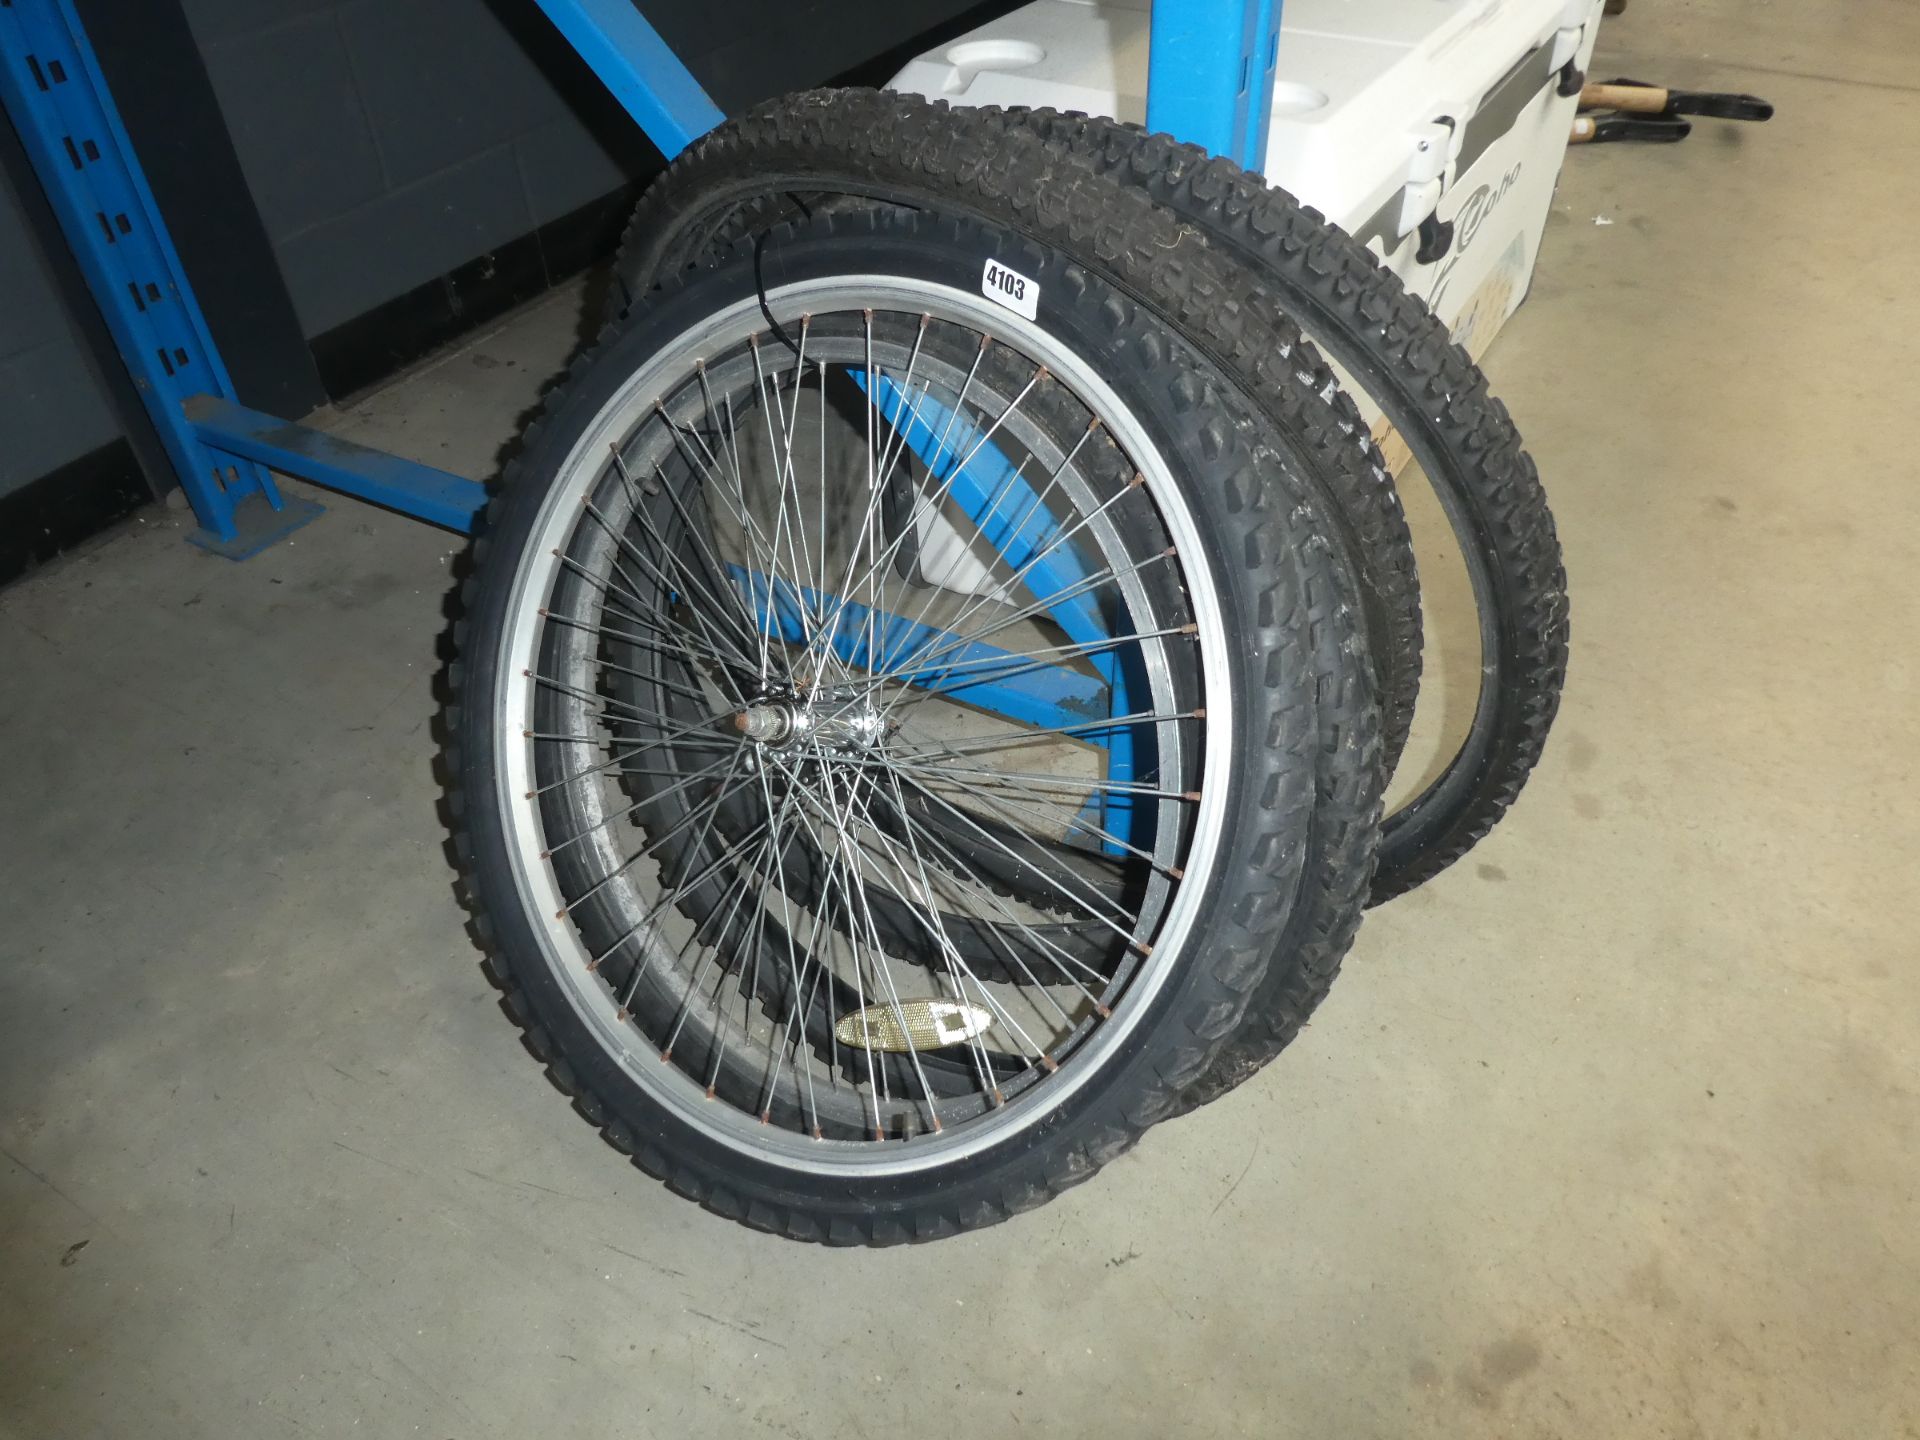 5 bike tyres (2 with wheels)